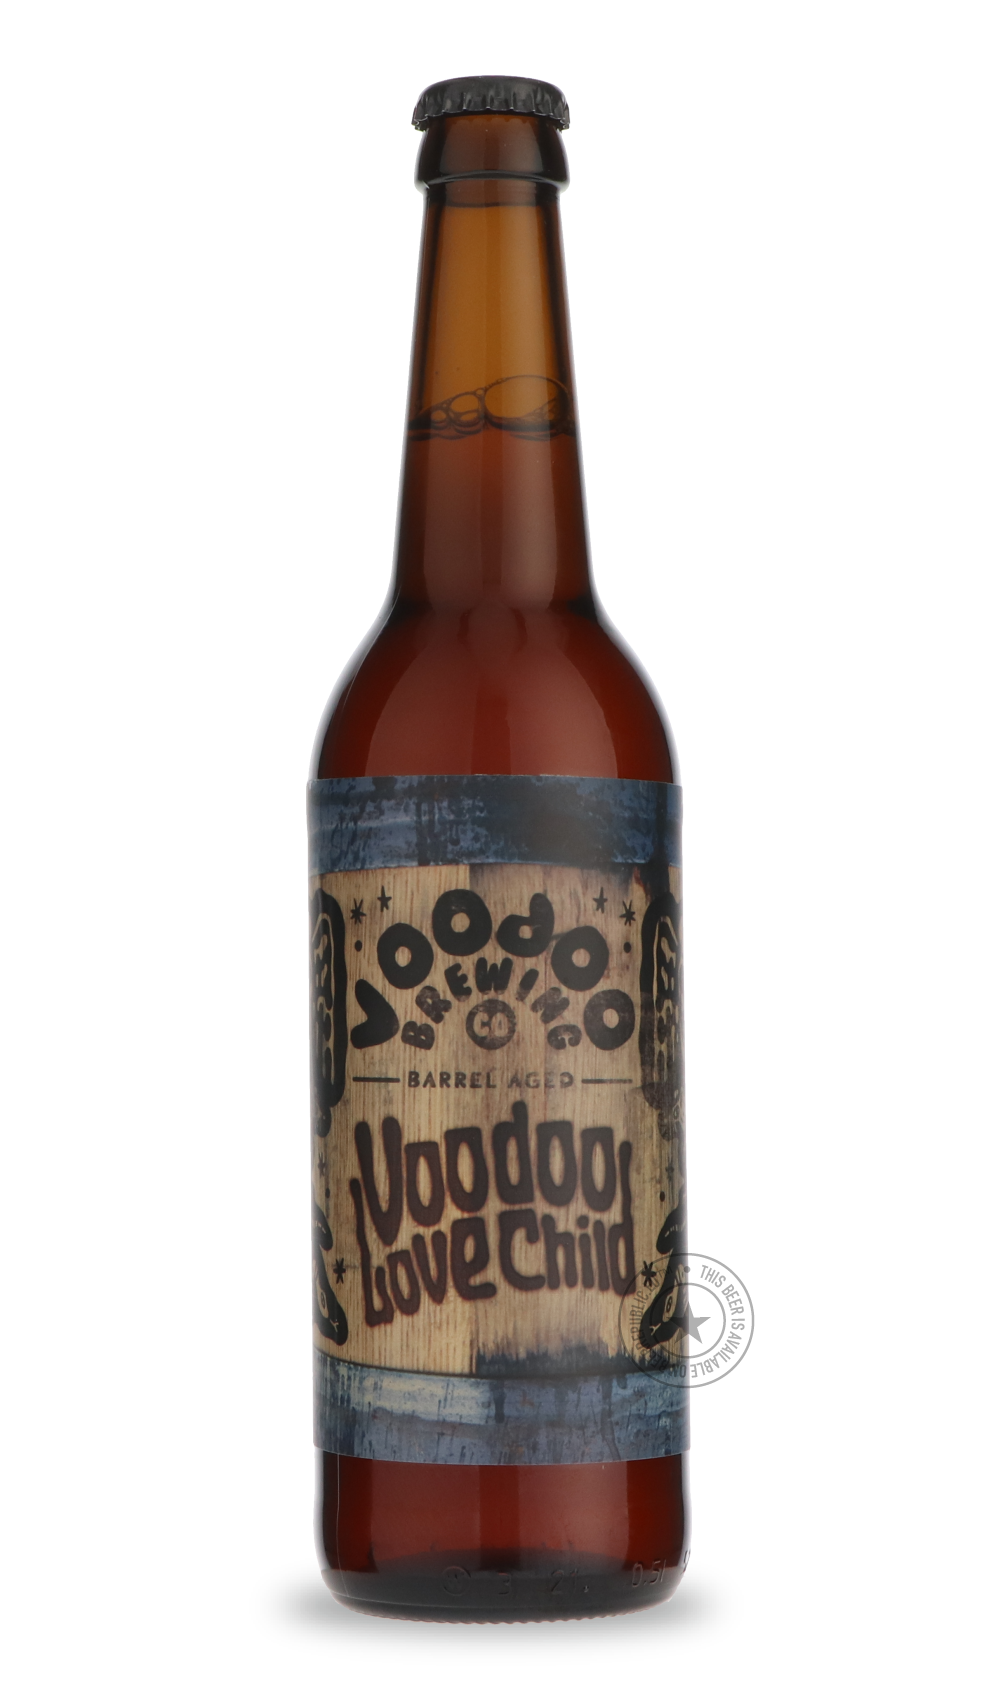 -Voodoo- Voodoo Love Child Aged in French Oak Malbec Barrels-Pale- Only @ Beer Republic - The best online beer store for American & Canadian craft beer - Buy beer online from the USA and Canada - Bier online kopen - Amerikaans bier kopen - Craft beer store - Craft beer kopen - Amerikanisch bier kaufen - Bier online kaufen - Acheter biere online - IPA - Stout - Porter - New England IPA - Hazy IPA - Imperial Stout - Barrel Aged - Barrel Aged Imperial Stout - Brown - Dark beer - Blond - Blonde - Pilsner - Lage